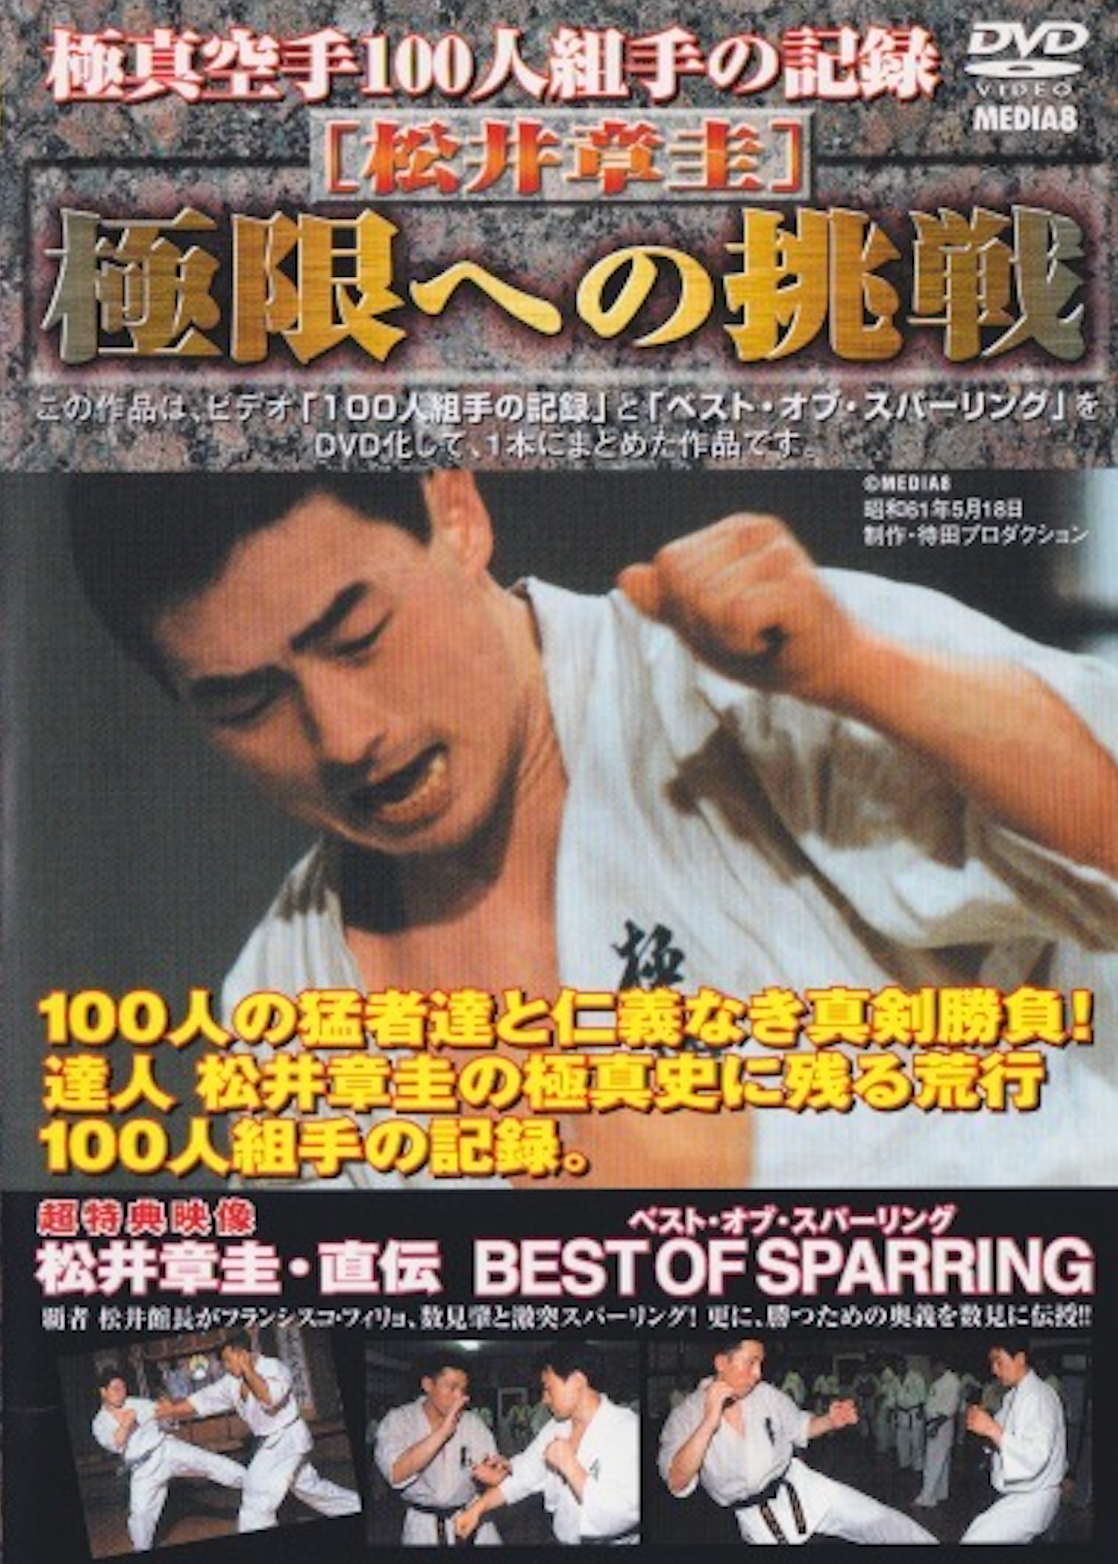 Challenging the Limit DVD with Akira Matsui